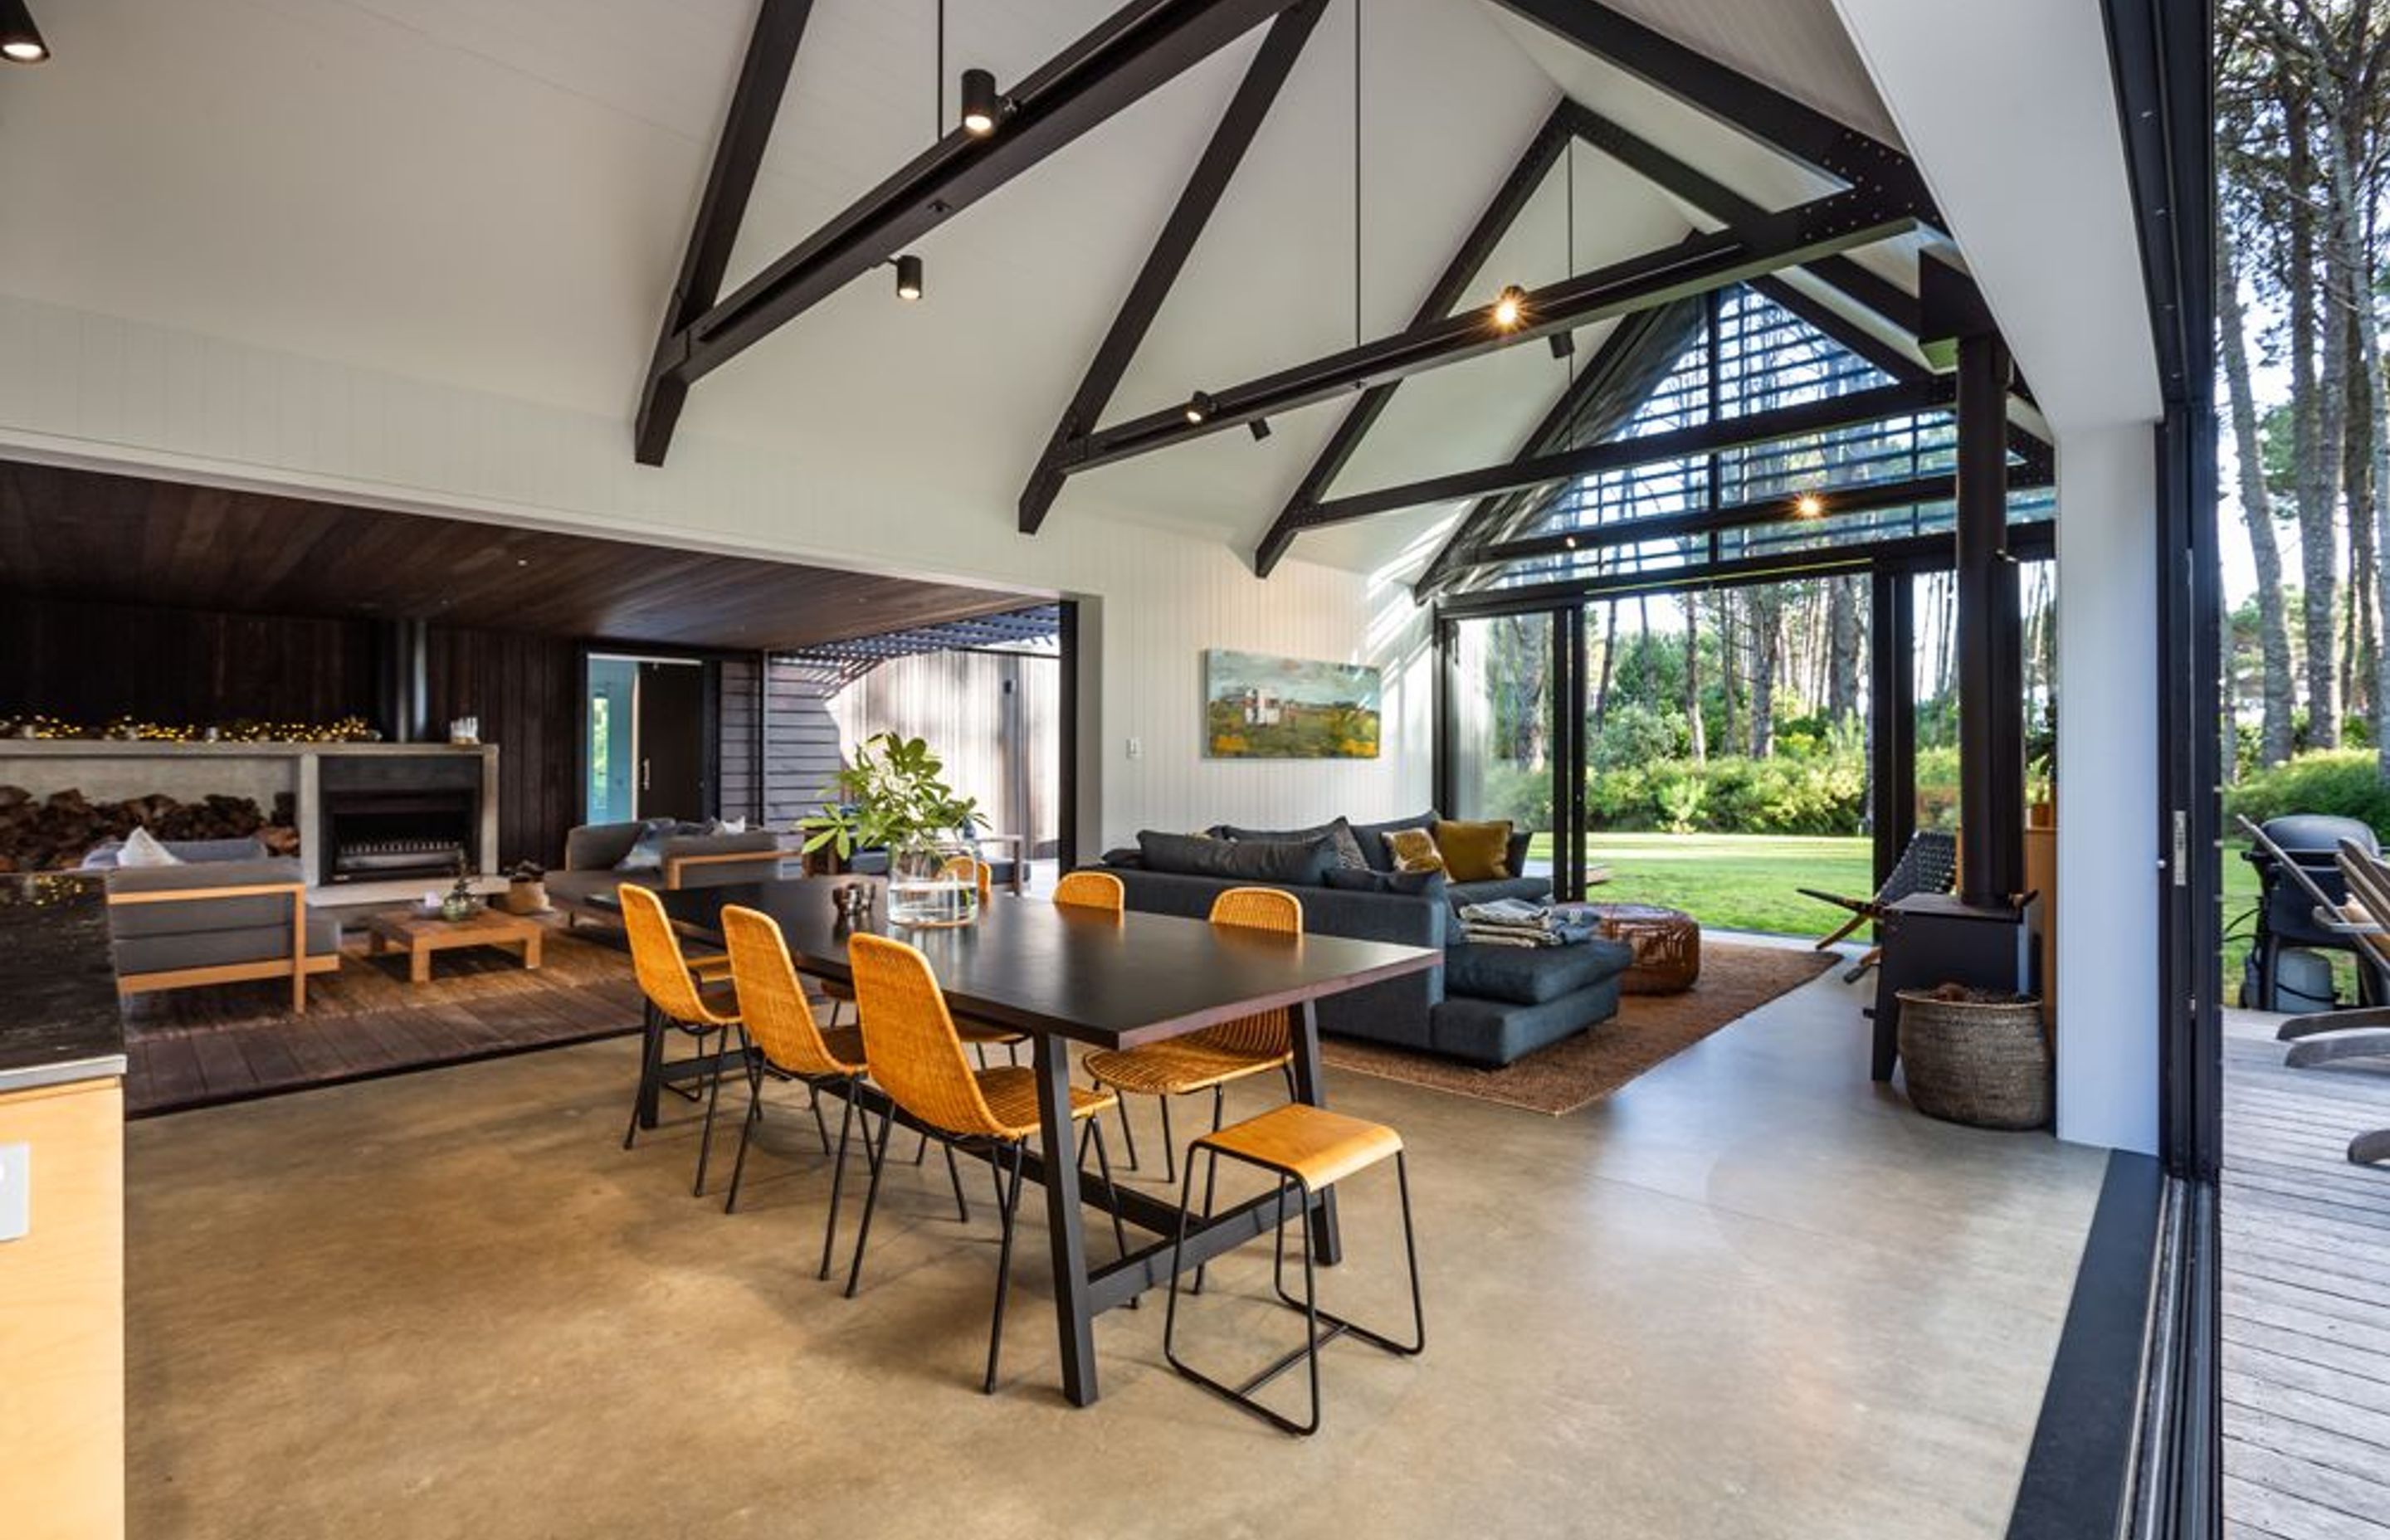 Exposed beams accentuate the gabled form, while a simple exposed concrete floor is combined with painted ply walls and ceilings.